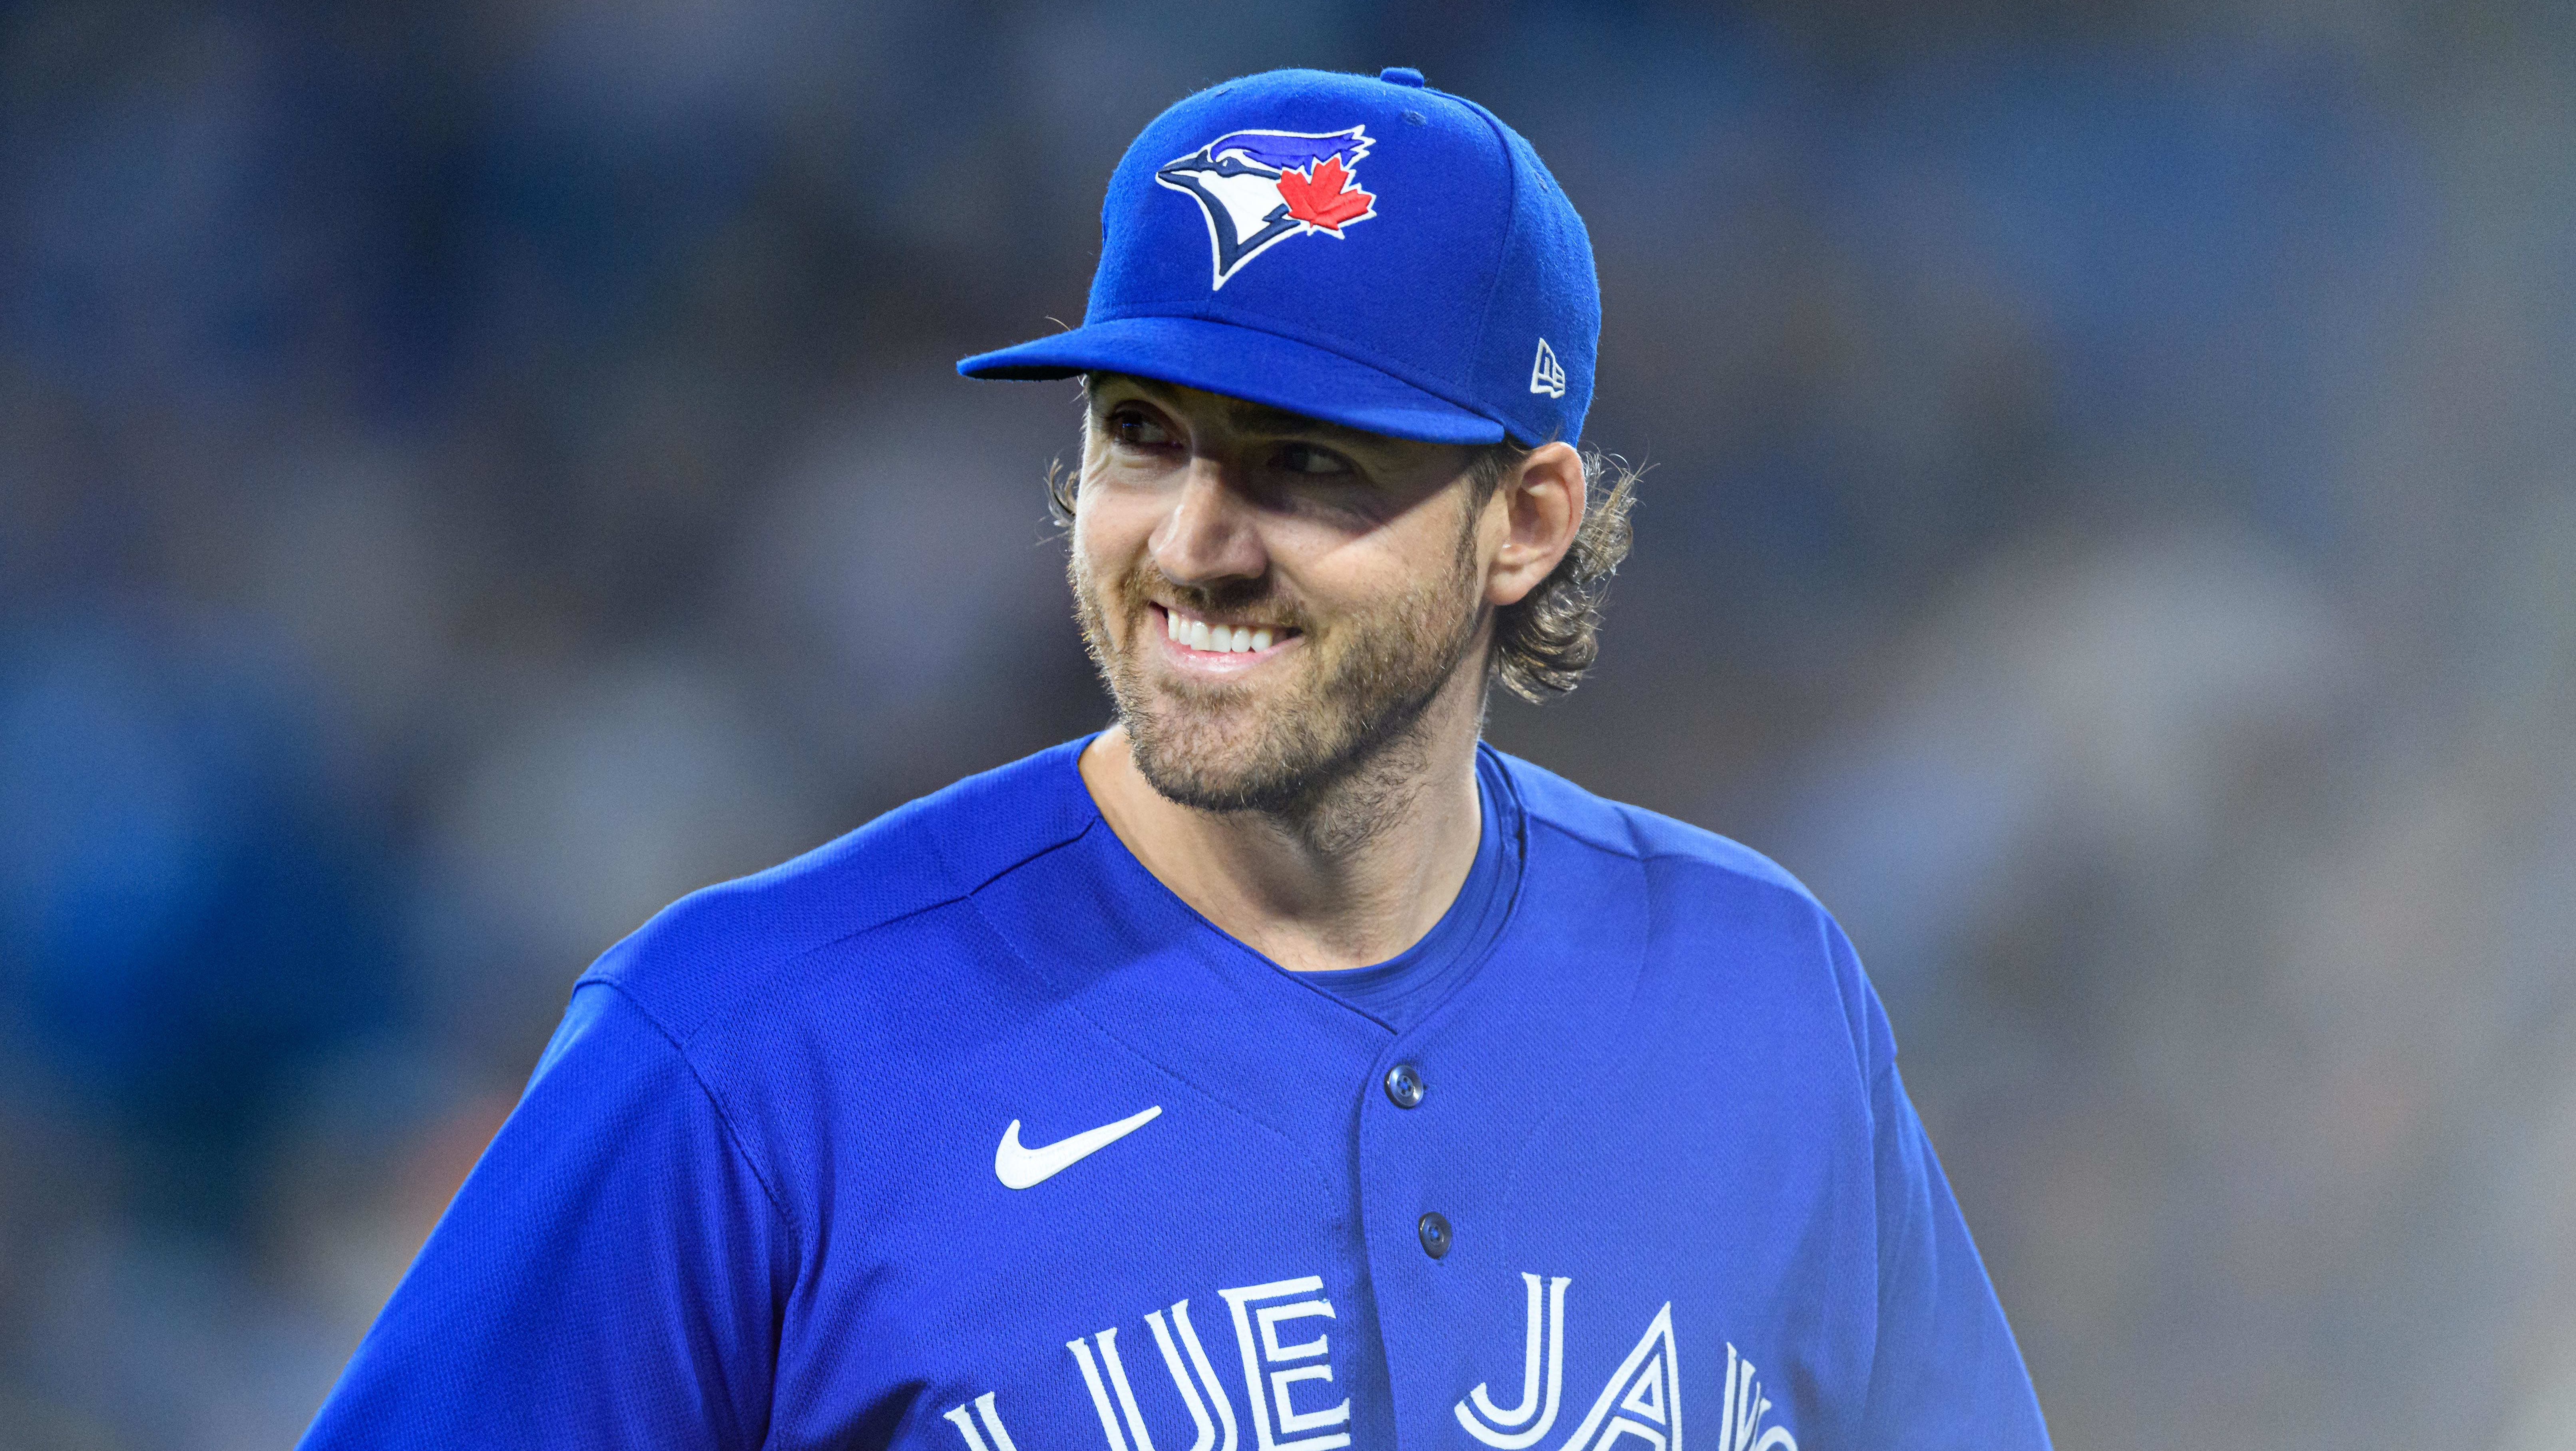 Blue Jays on verge of playoff spot after thumping Rays